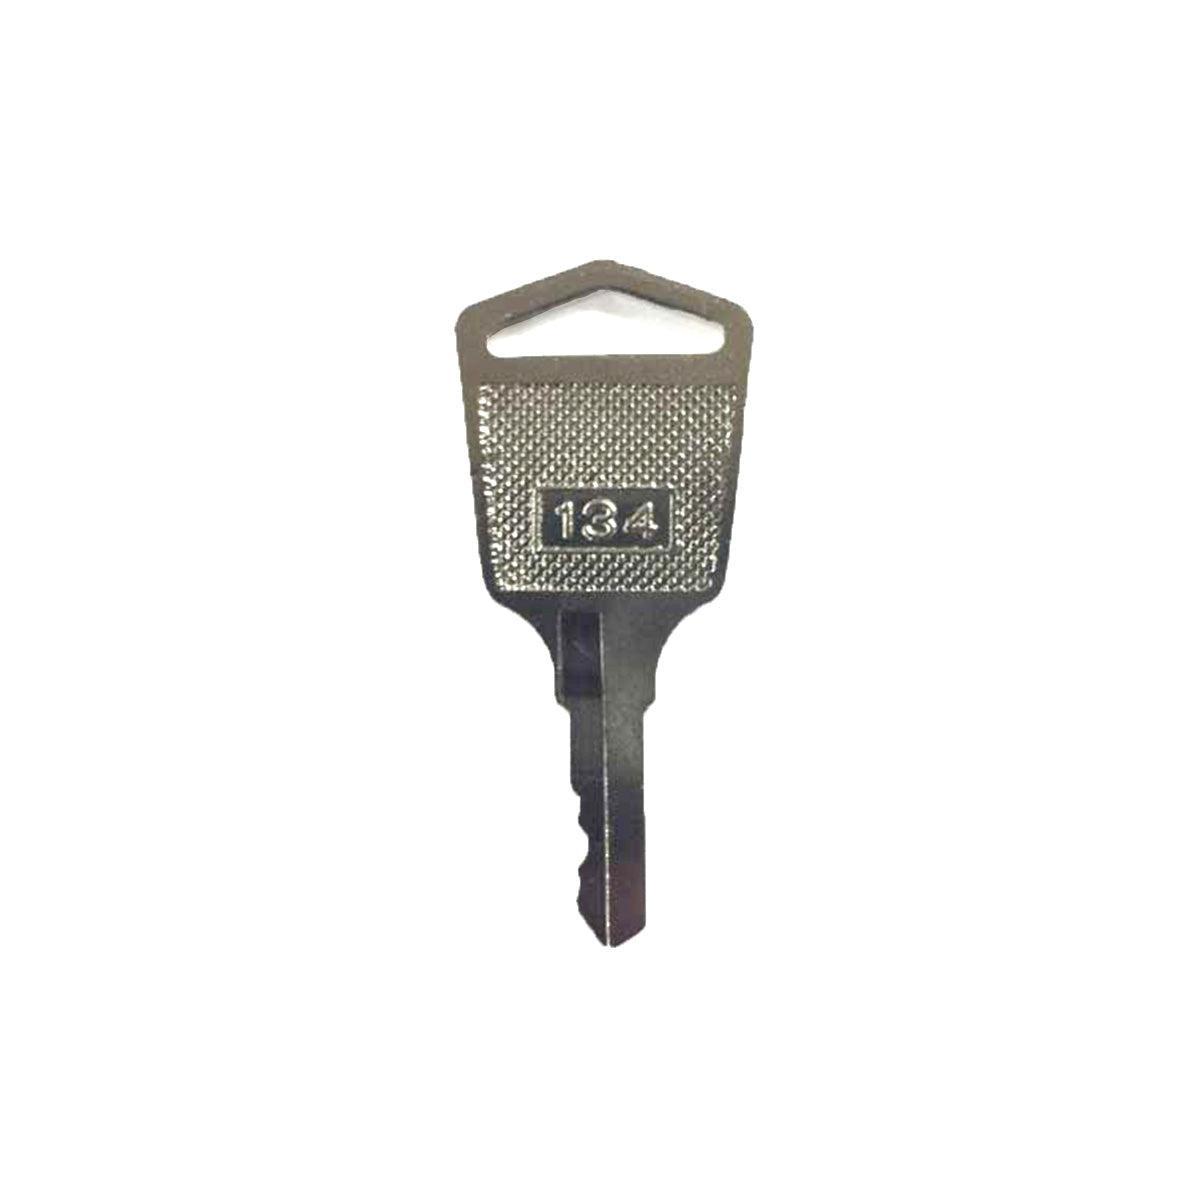 Product Time-Precision TP100 / TP200 Replacement Keys — ClockingSystems image